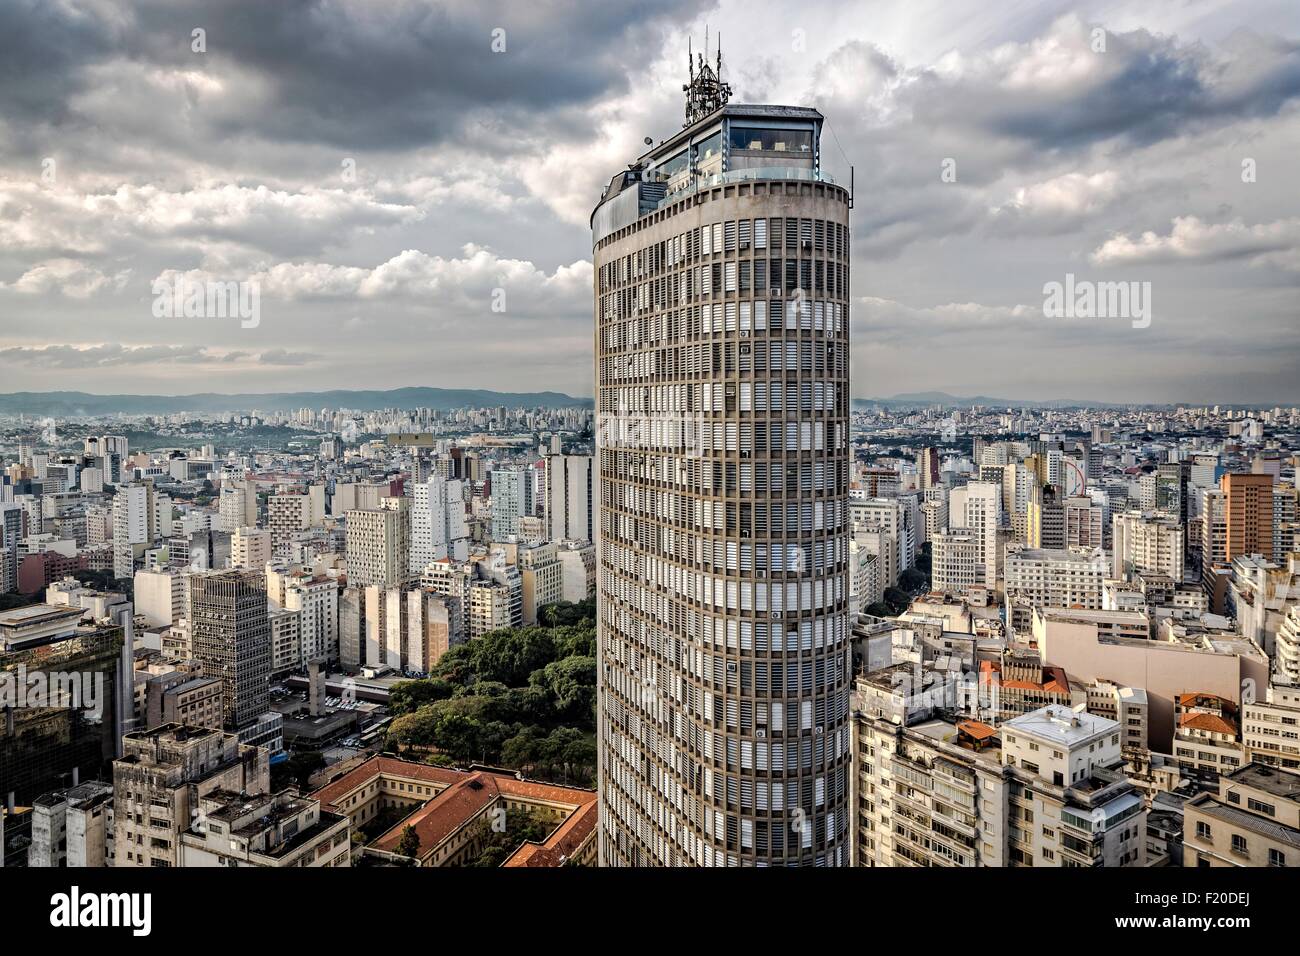 City skyline seen from a balcony in a building in Sao Paulo. The gigantic  city, famous for its cultural and business vocation in Brazil. 4958715  Stock Photo at Vecteezy